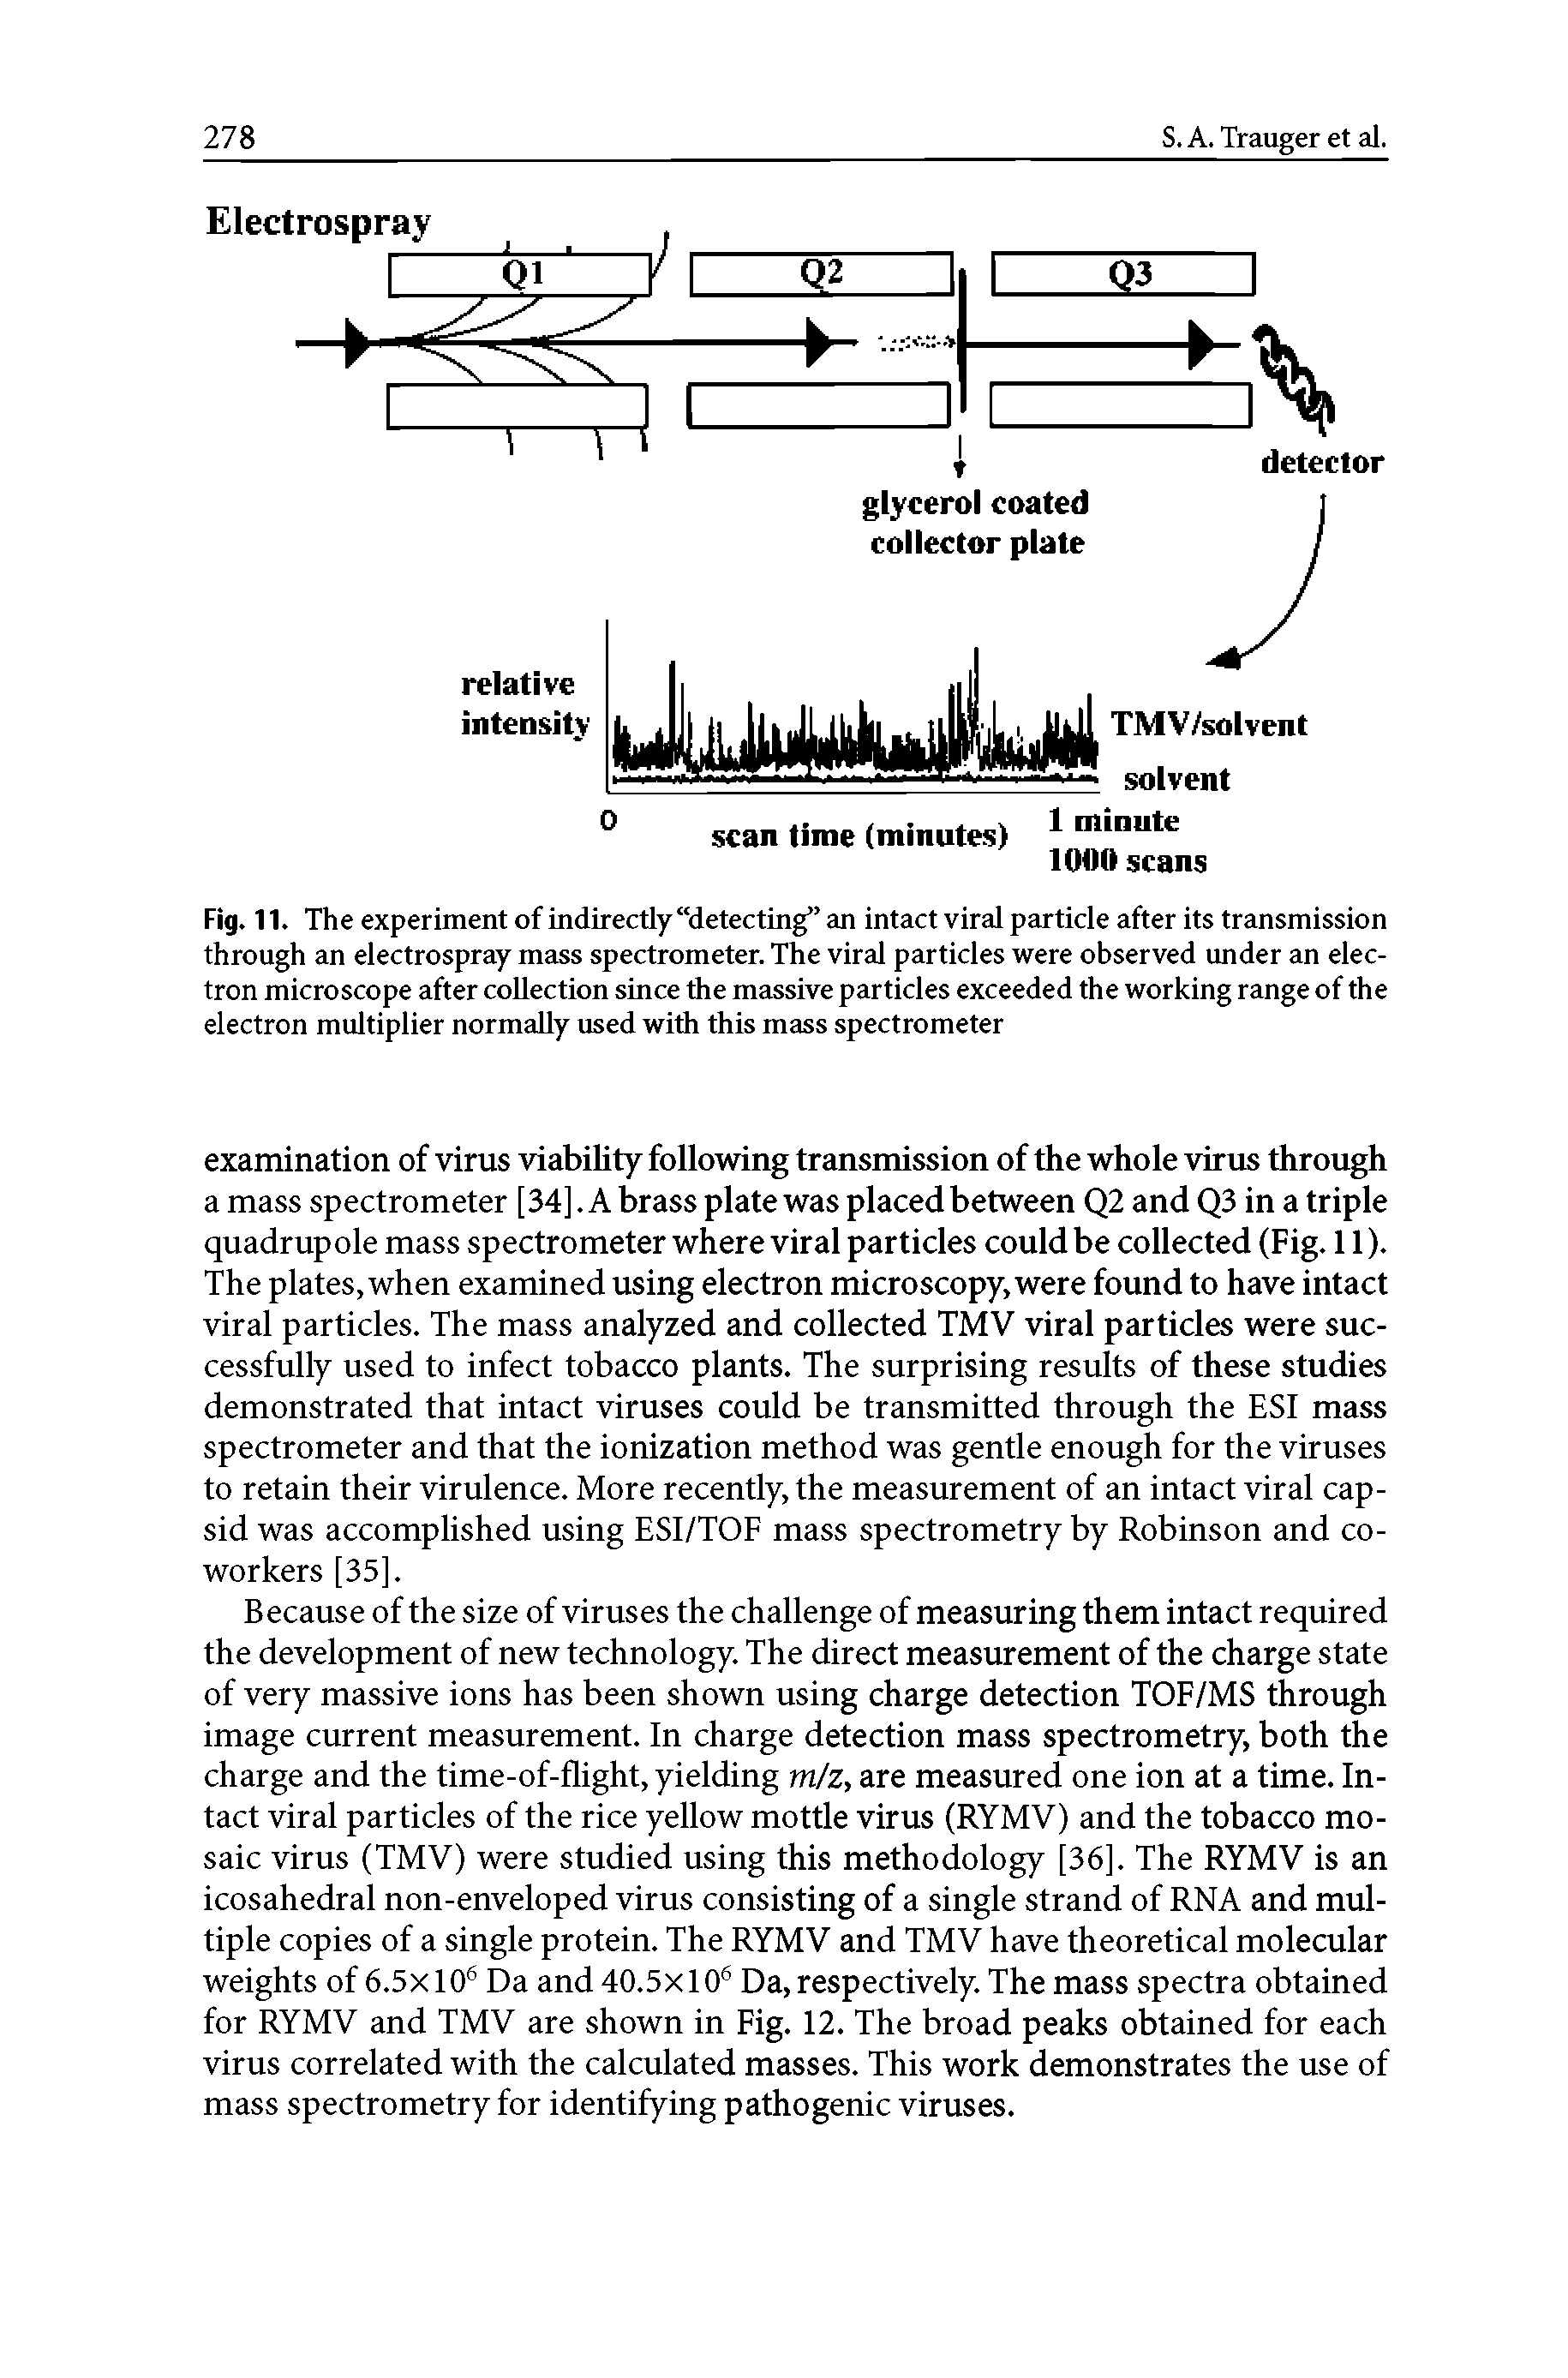 Fig. 11. The experiment of indirectly detecting an intact viral particle after its transmission through an electrospray mass spectrometer. The viral particles were observed under an electron microscope after collection since the massive particles exceeded the working range of the electron multiplier normally used with this mass spectrometer...